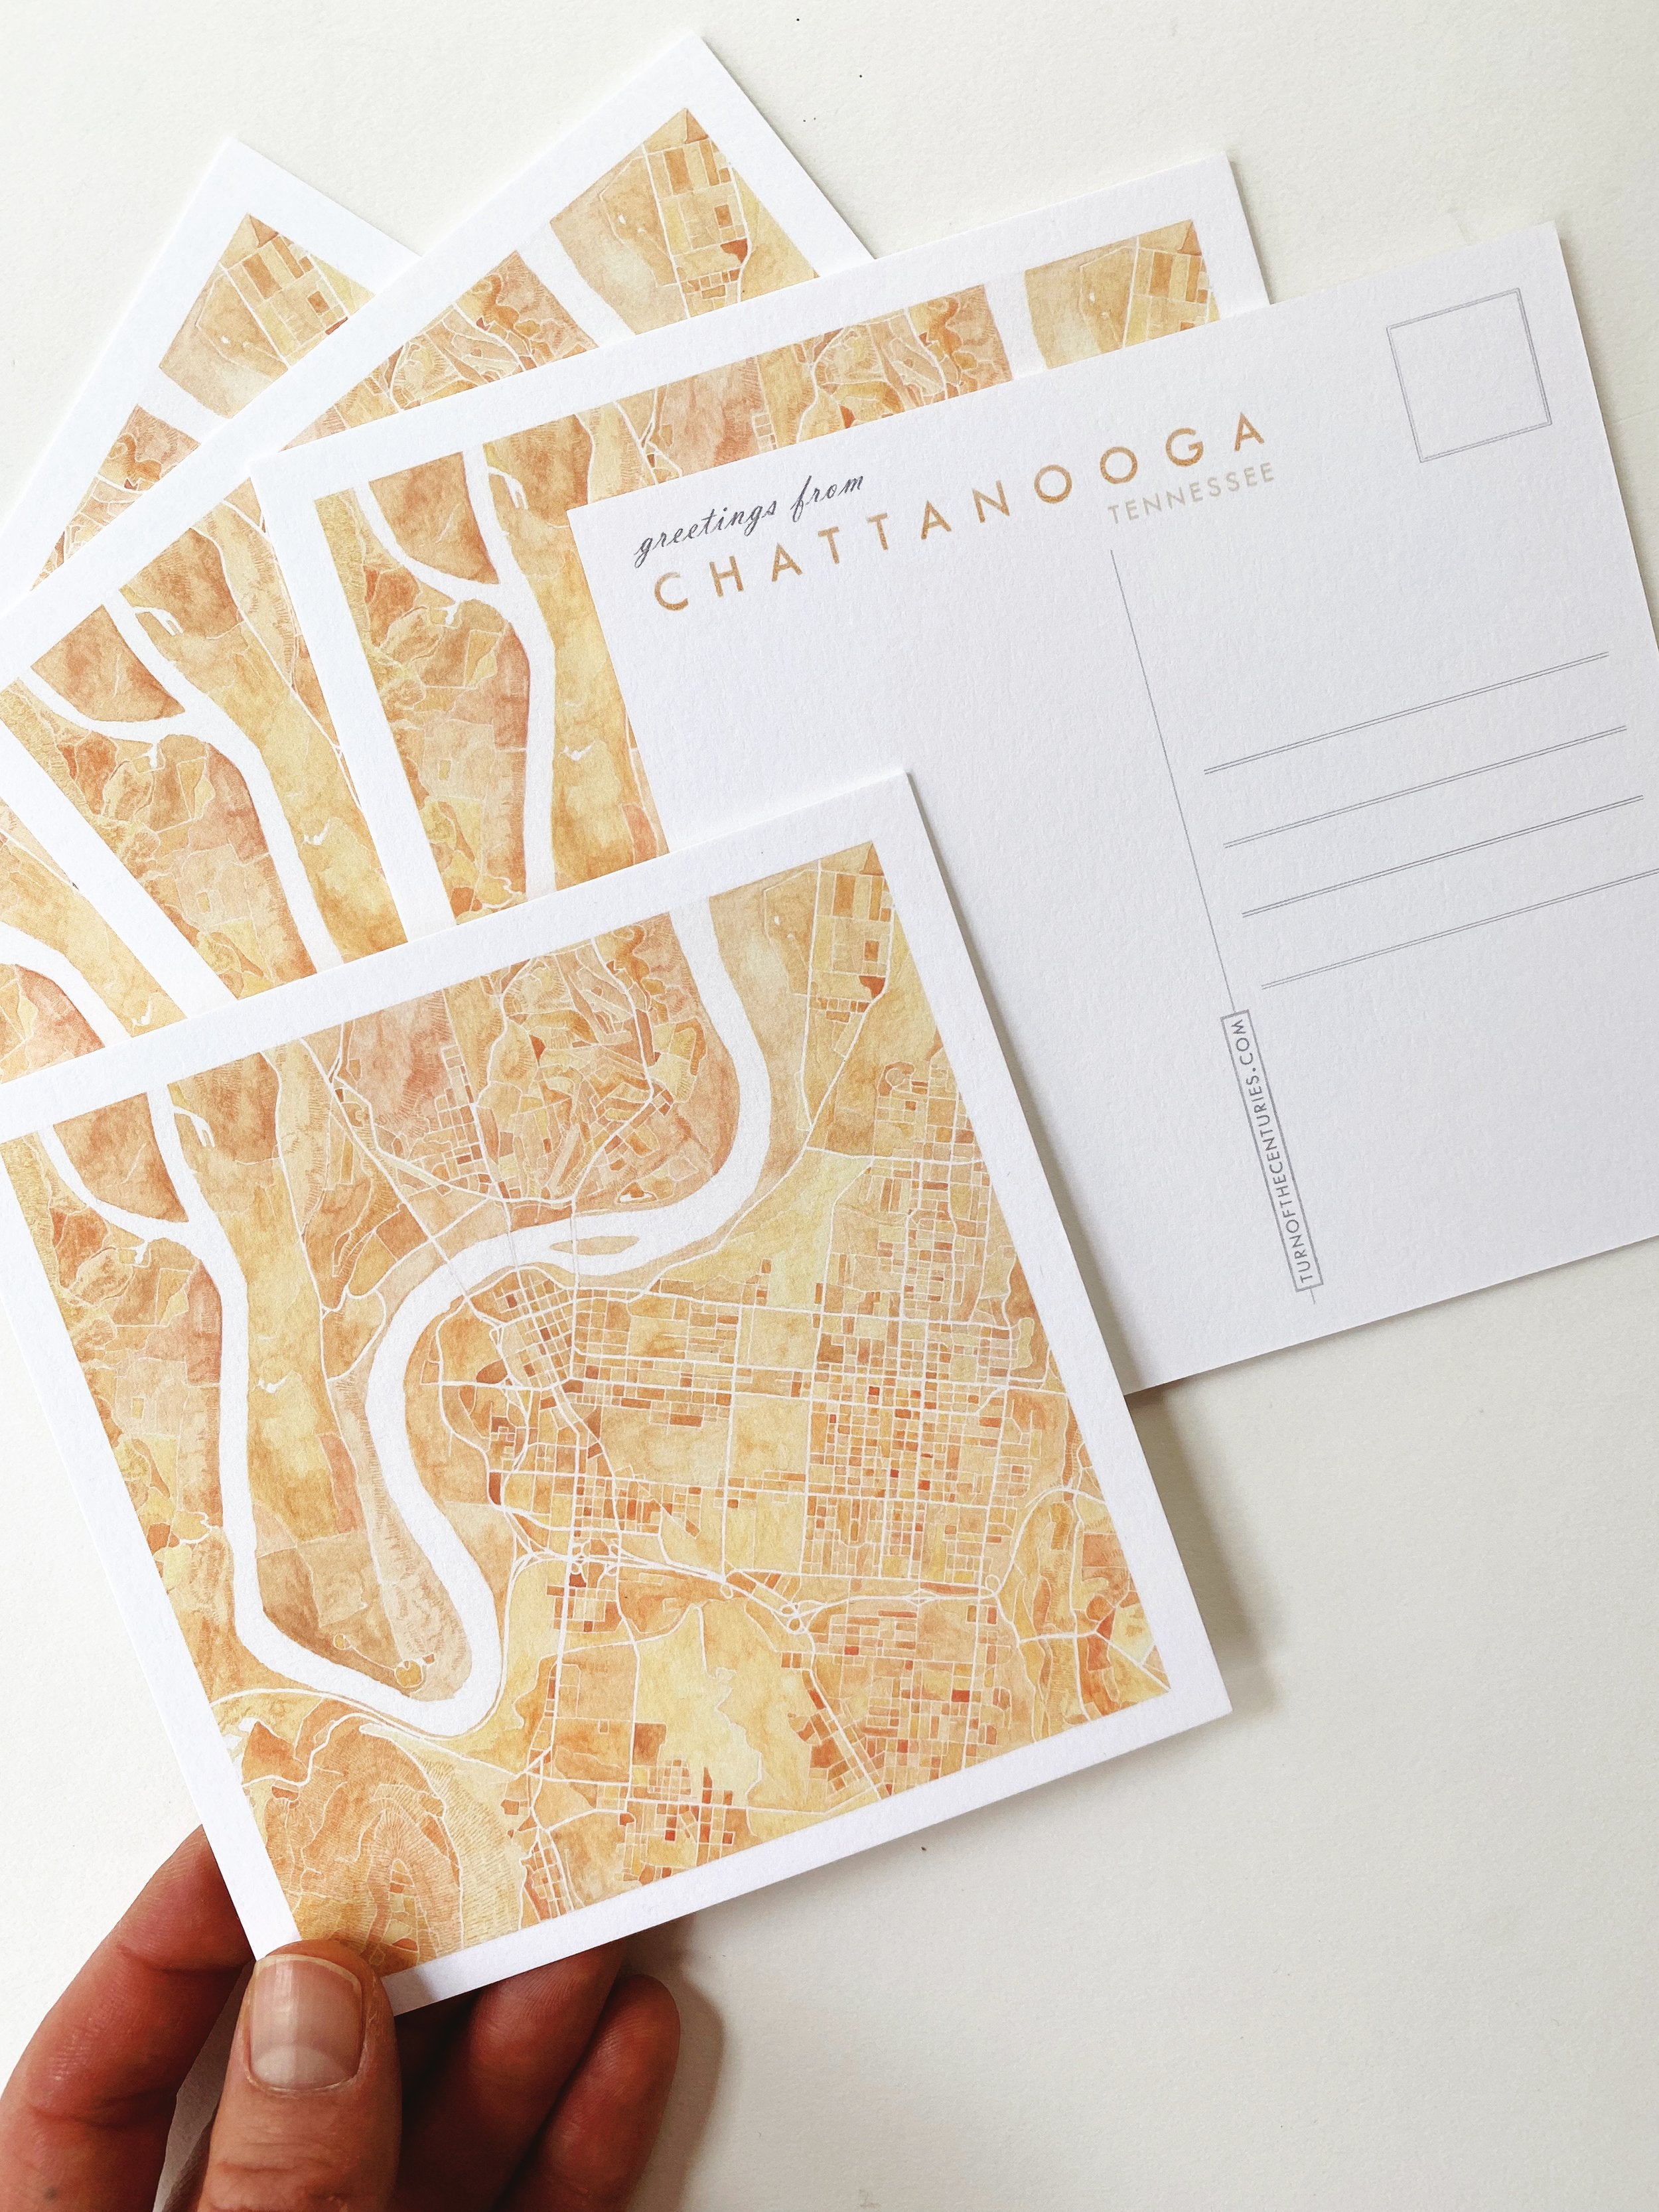 CHATTANOOGA Tennessee Map Postcard